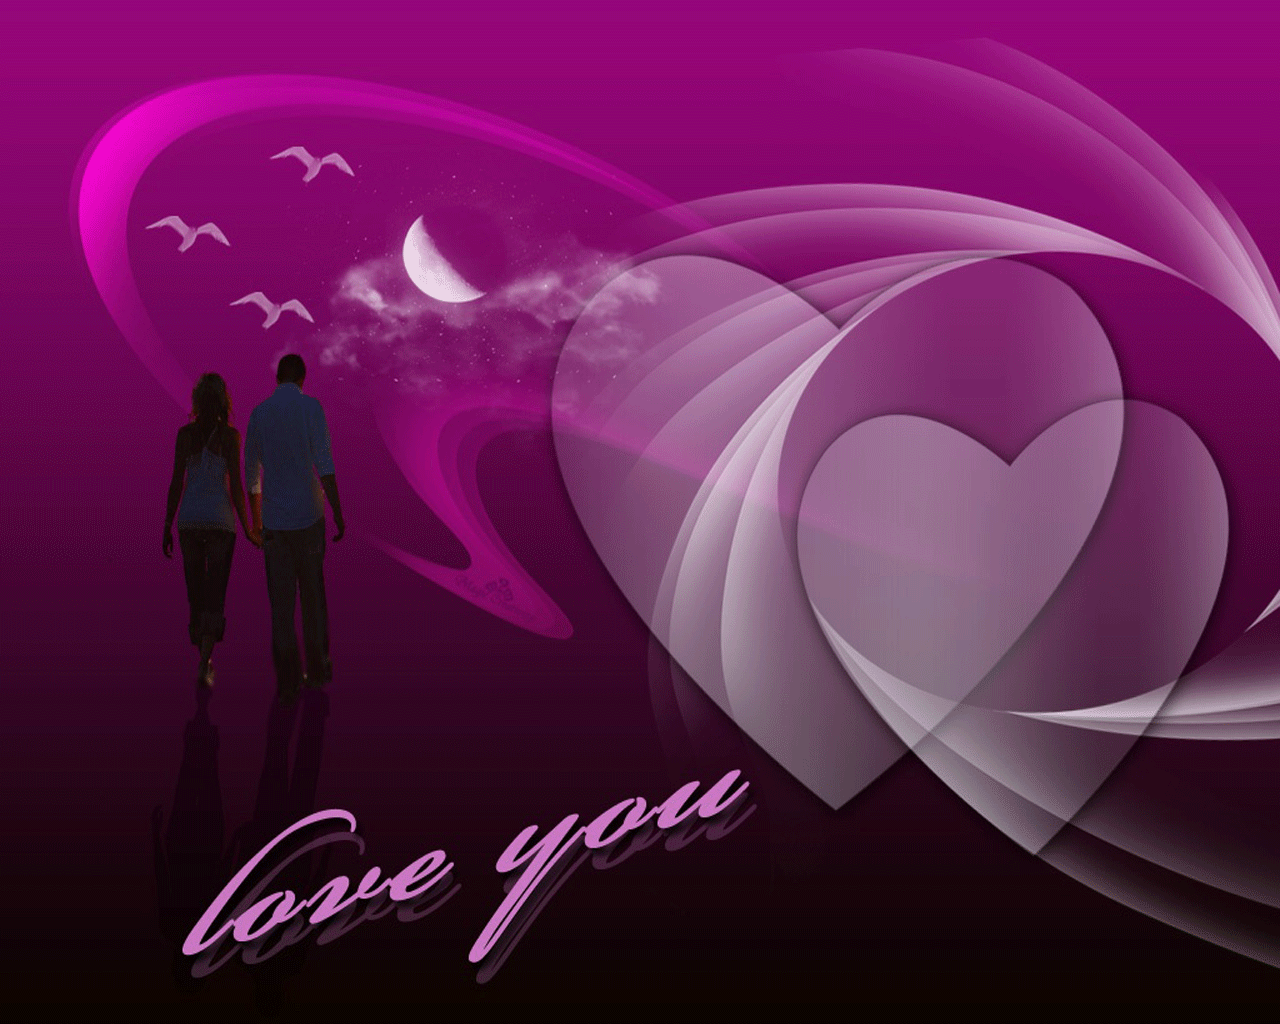 Cool 3d Love Wallpapers Wallpaper Cave Find the best life quotes wallpaper on getwallpapers. cool 3d love wallpapers wallpaper cave